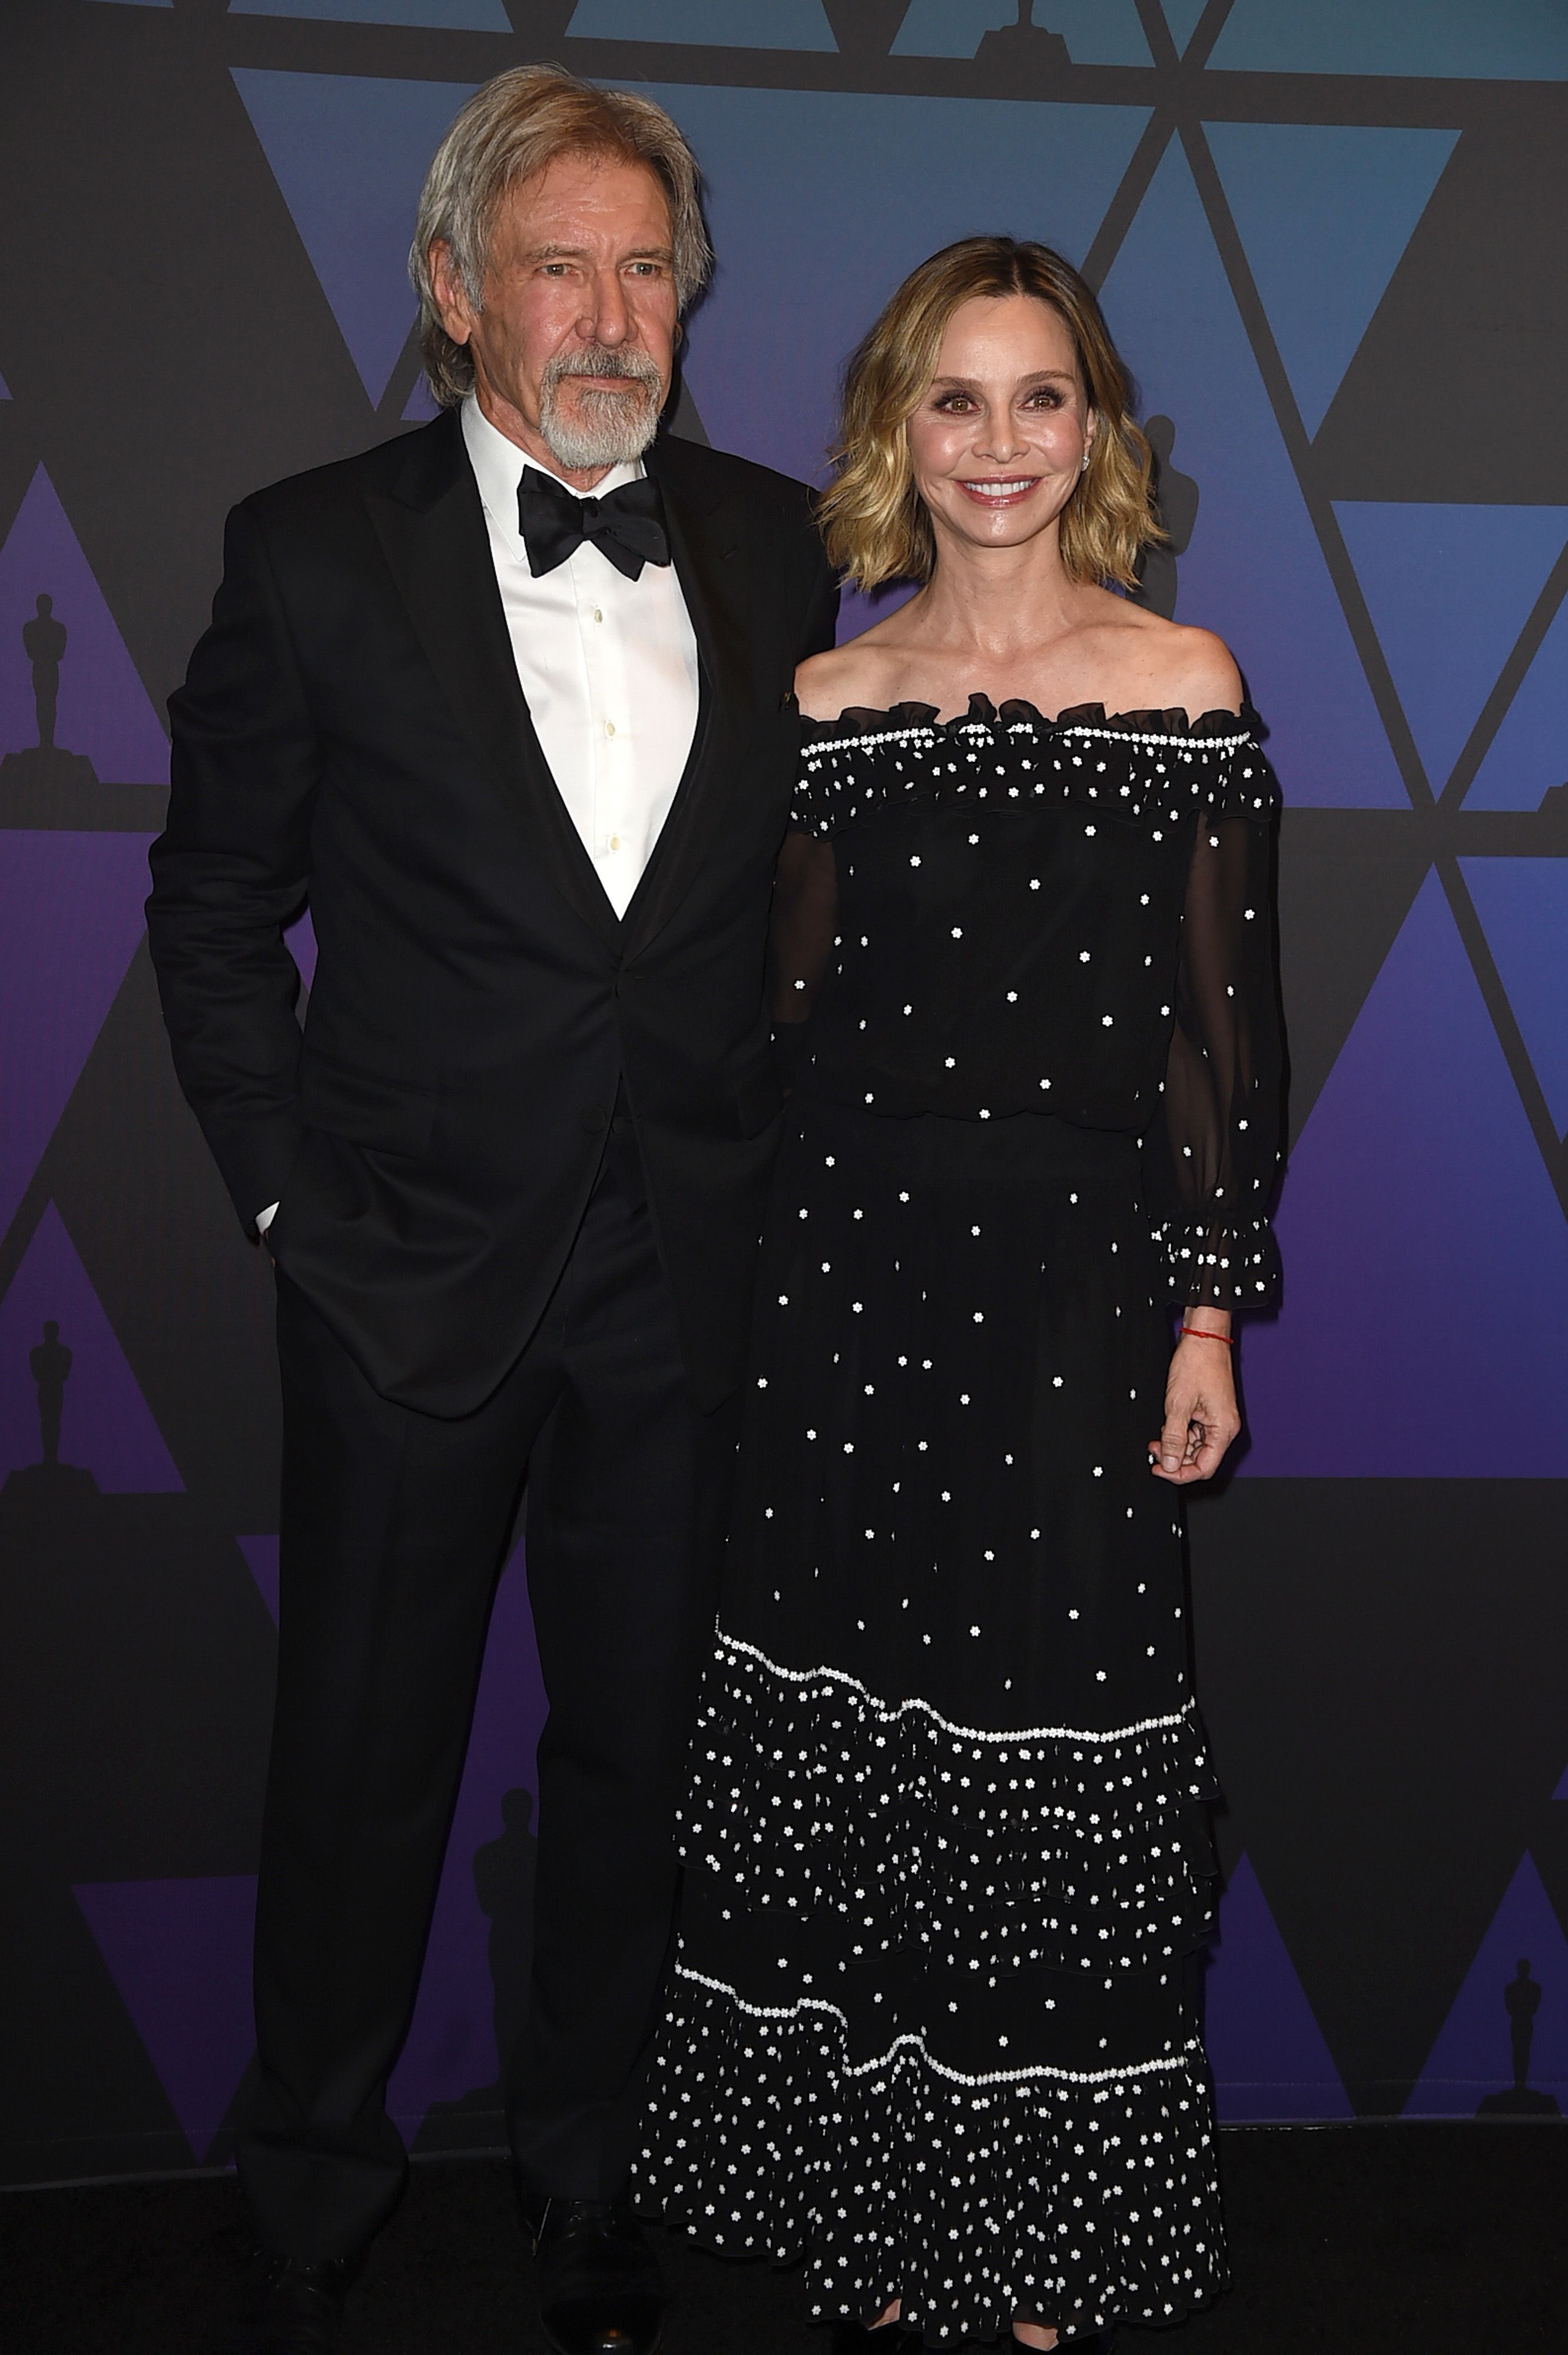 Harrison Ford and Calista Flockhart attend the Academy of Motion Picture Arts and Sciences' 2018 Governors Awards.